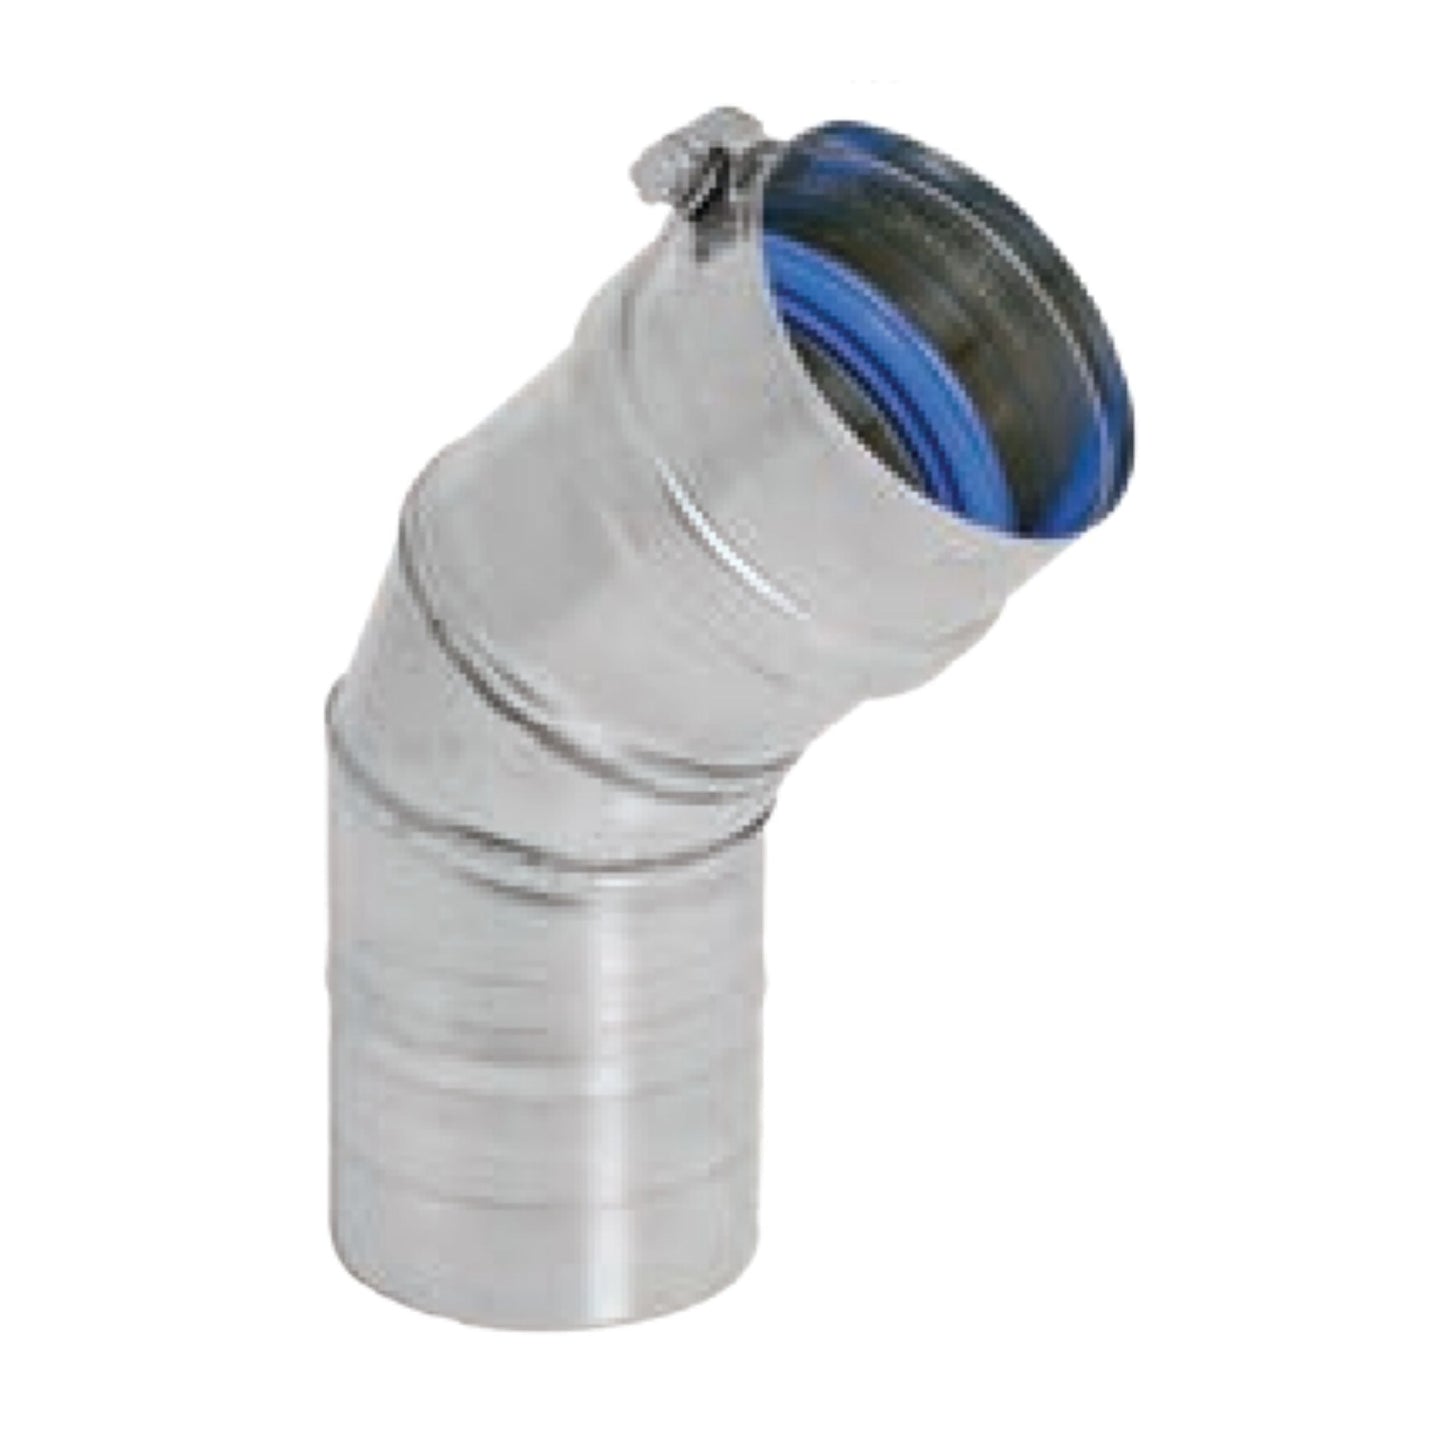 DuraVent FasNSeal 8" 45 Degree 29-4C Stainless Steel Elbow